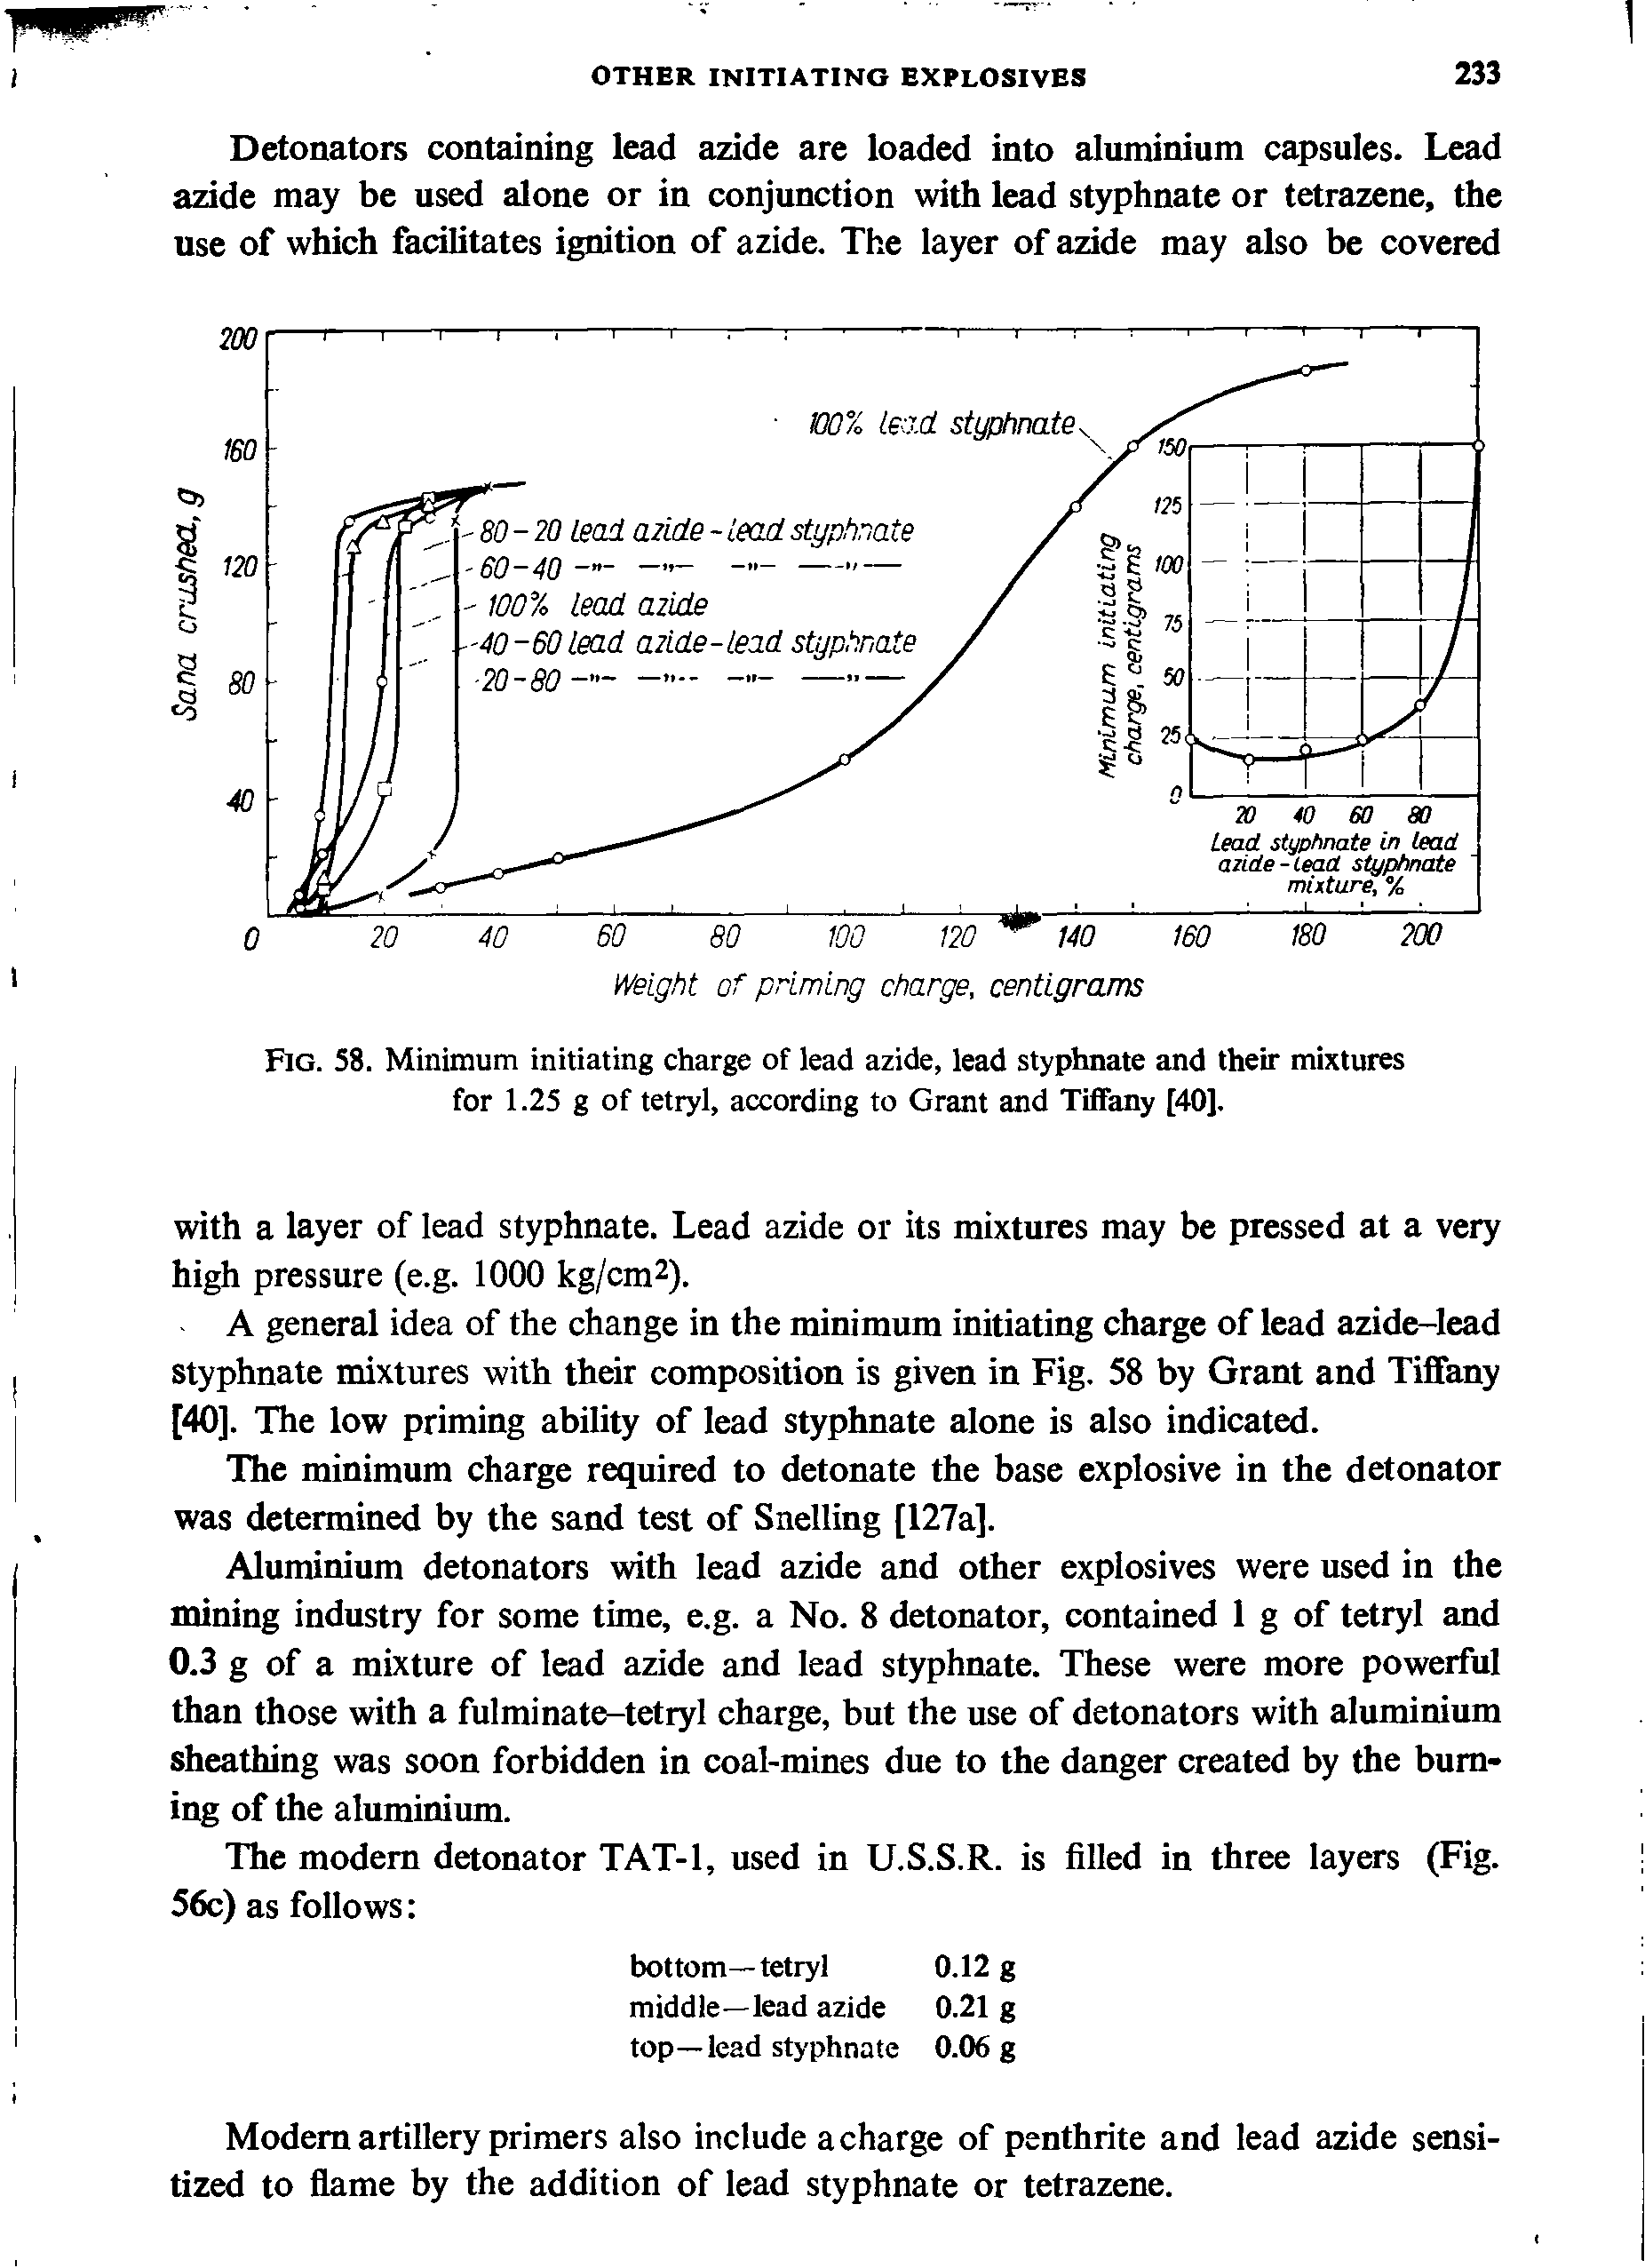 Fig. 58. Minimum initiating charge of lead azide, lead styphnate and their mixtures for 1.25 g of tetryl, according to Grant and Tiffany [40].